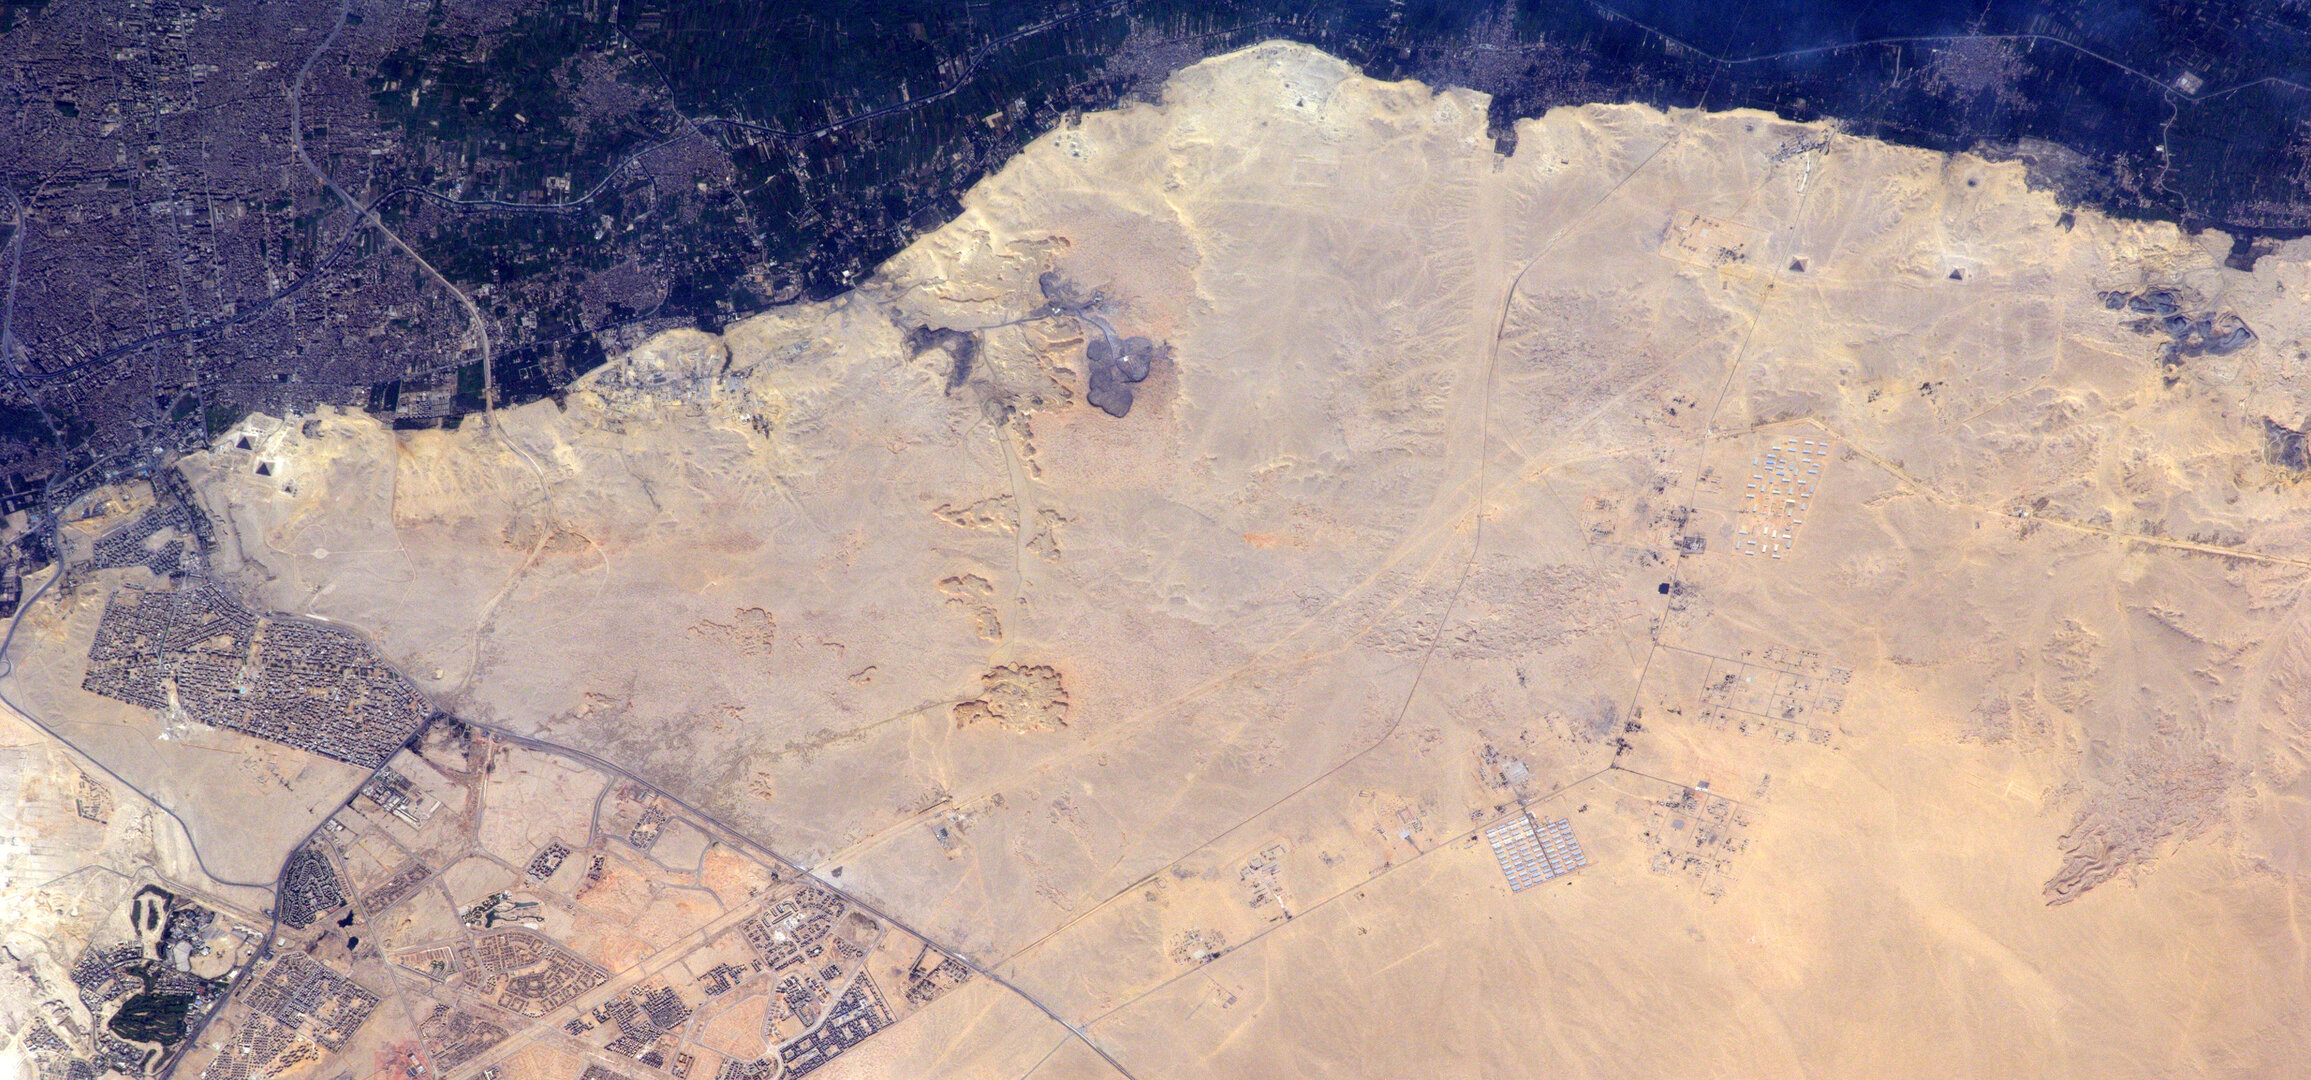 Pyramids from Space Station